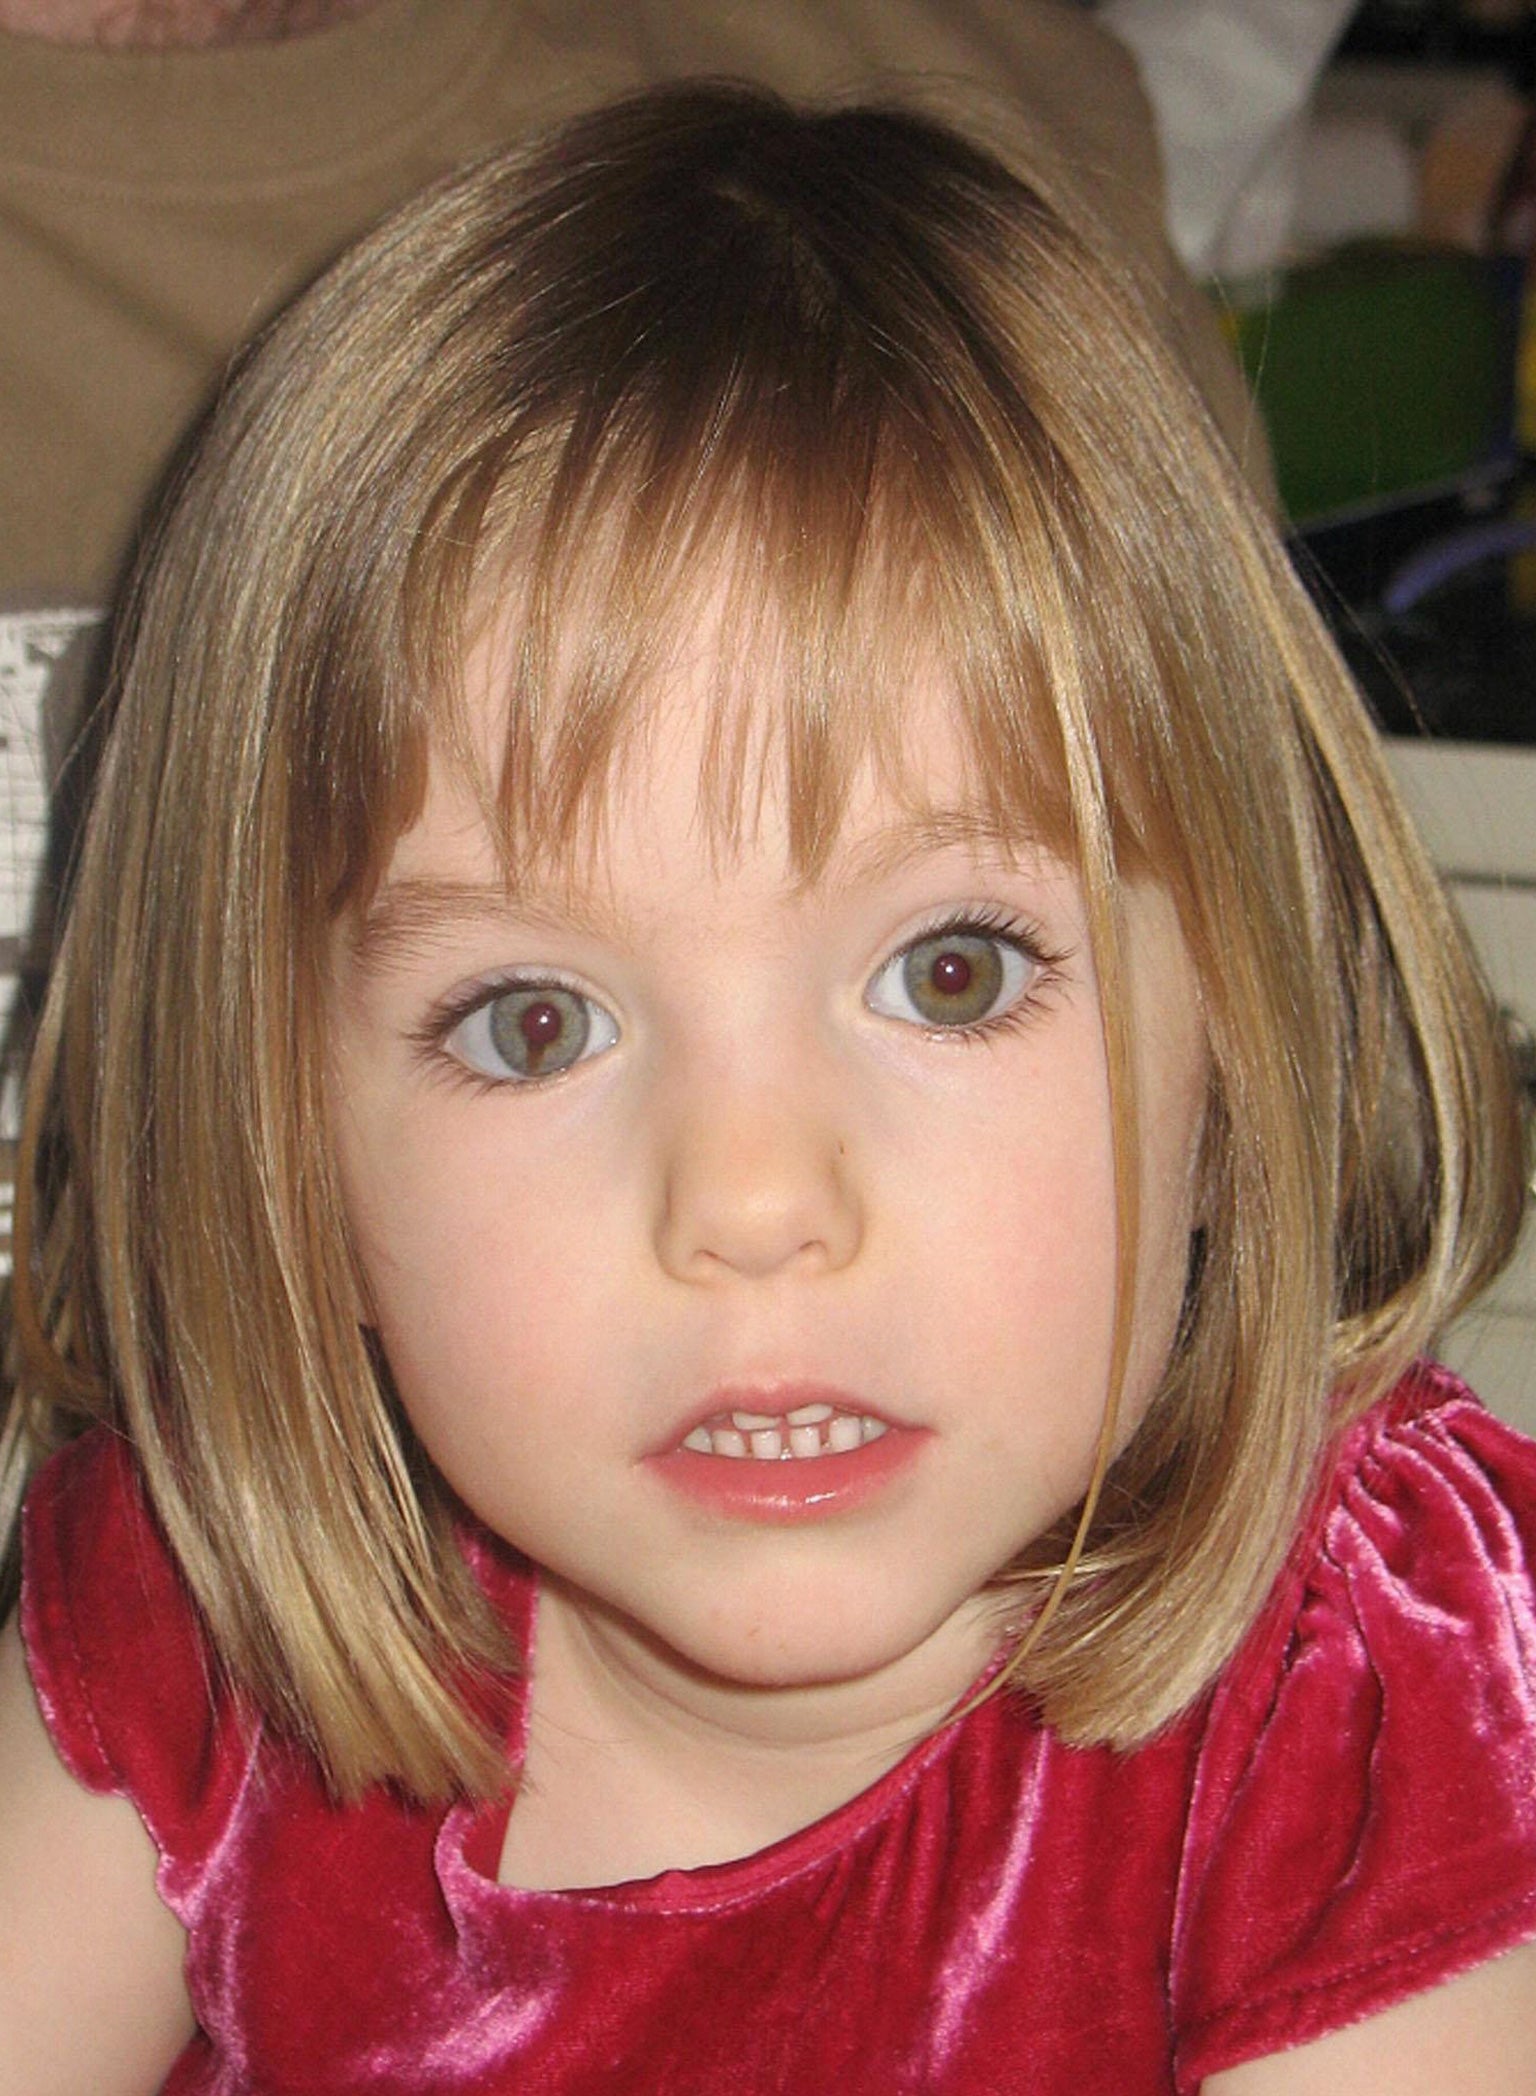 Madeleine McCann, who disappeared in the Praia de Lux resort in Portugal